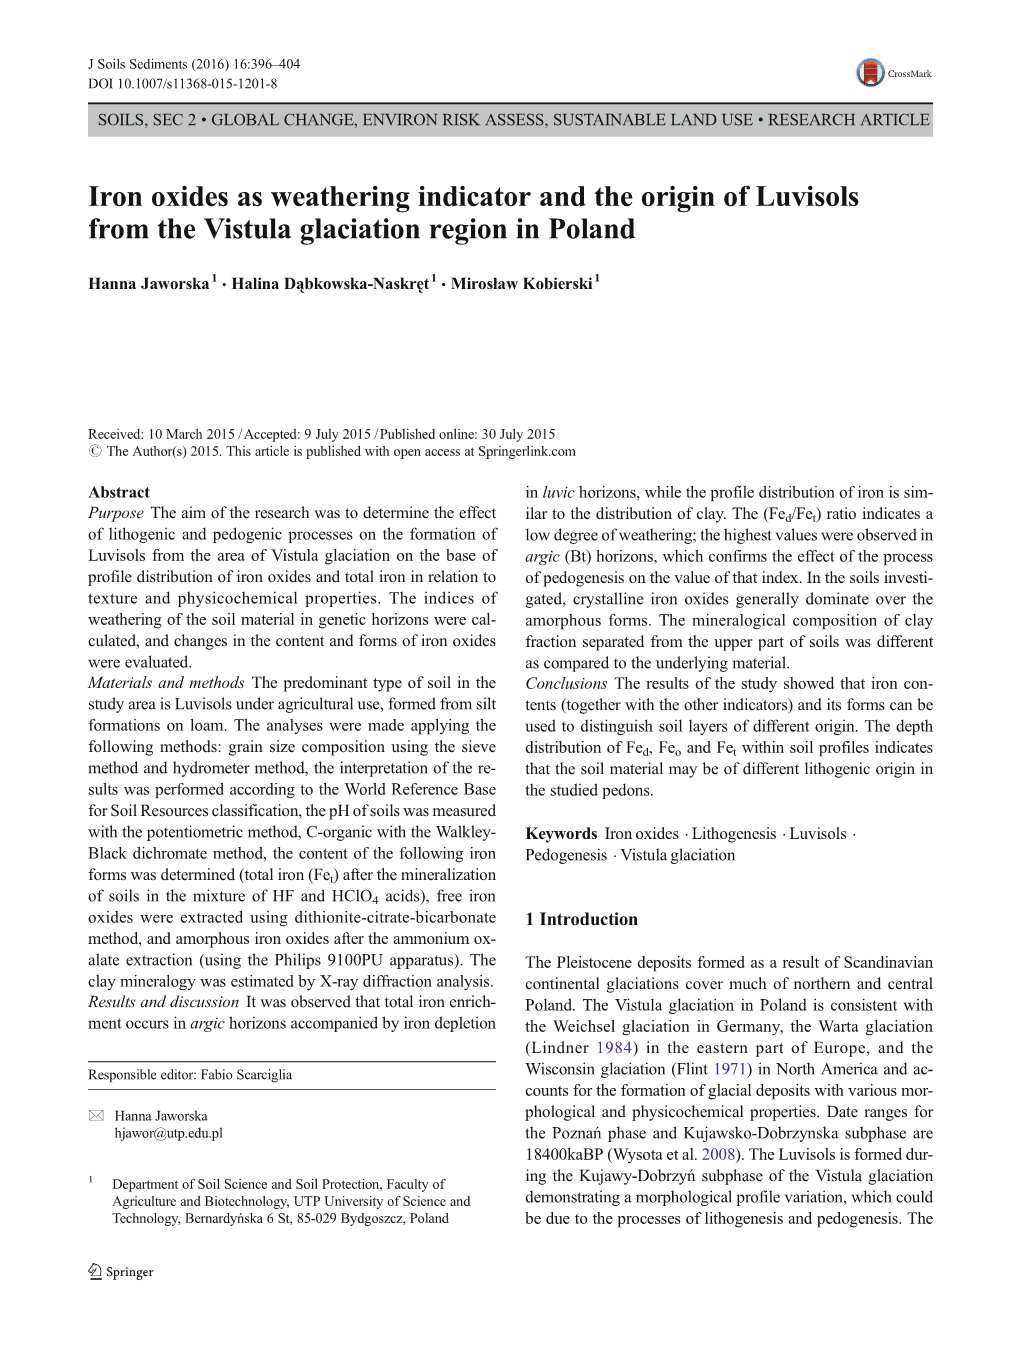 Iron Oxides As Weathering Indicator and the Origin of Luvisols from the Vistula Glaciation Region in Poland